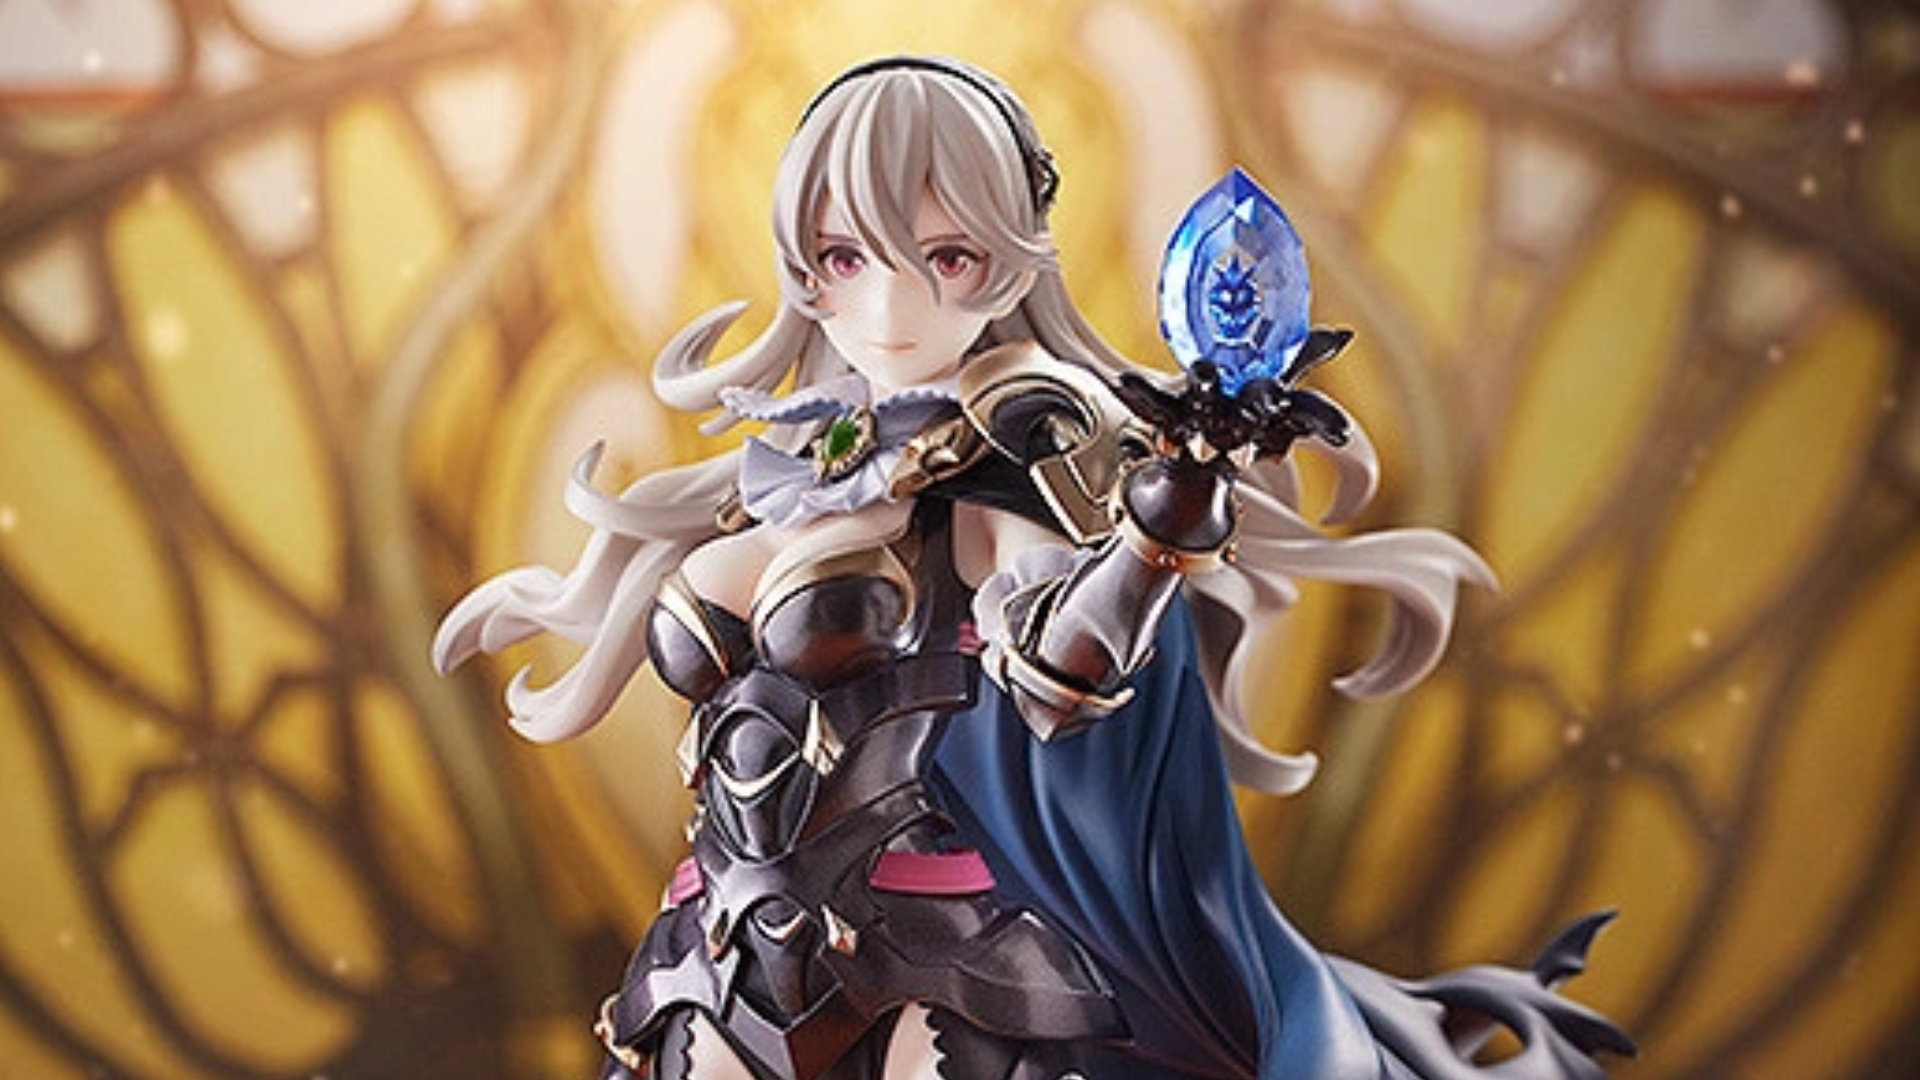 Fire Emblem Fates Nohr Noble Corrin Figure Pre-Orders Available